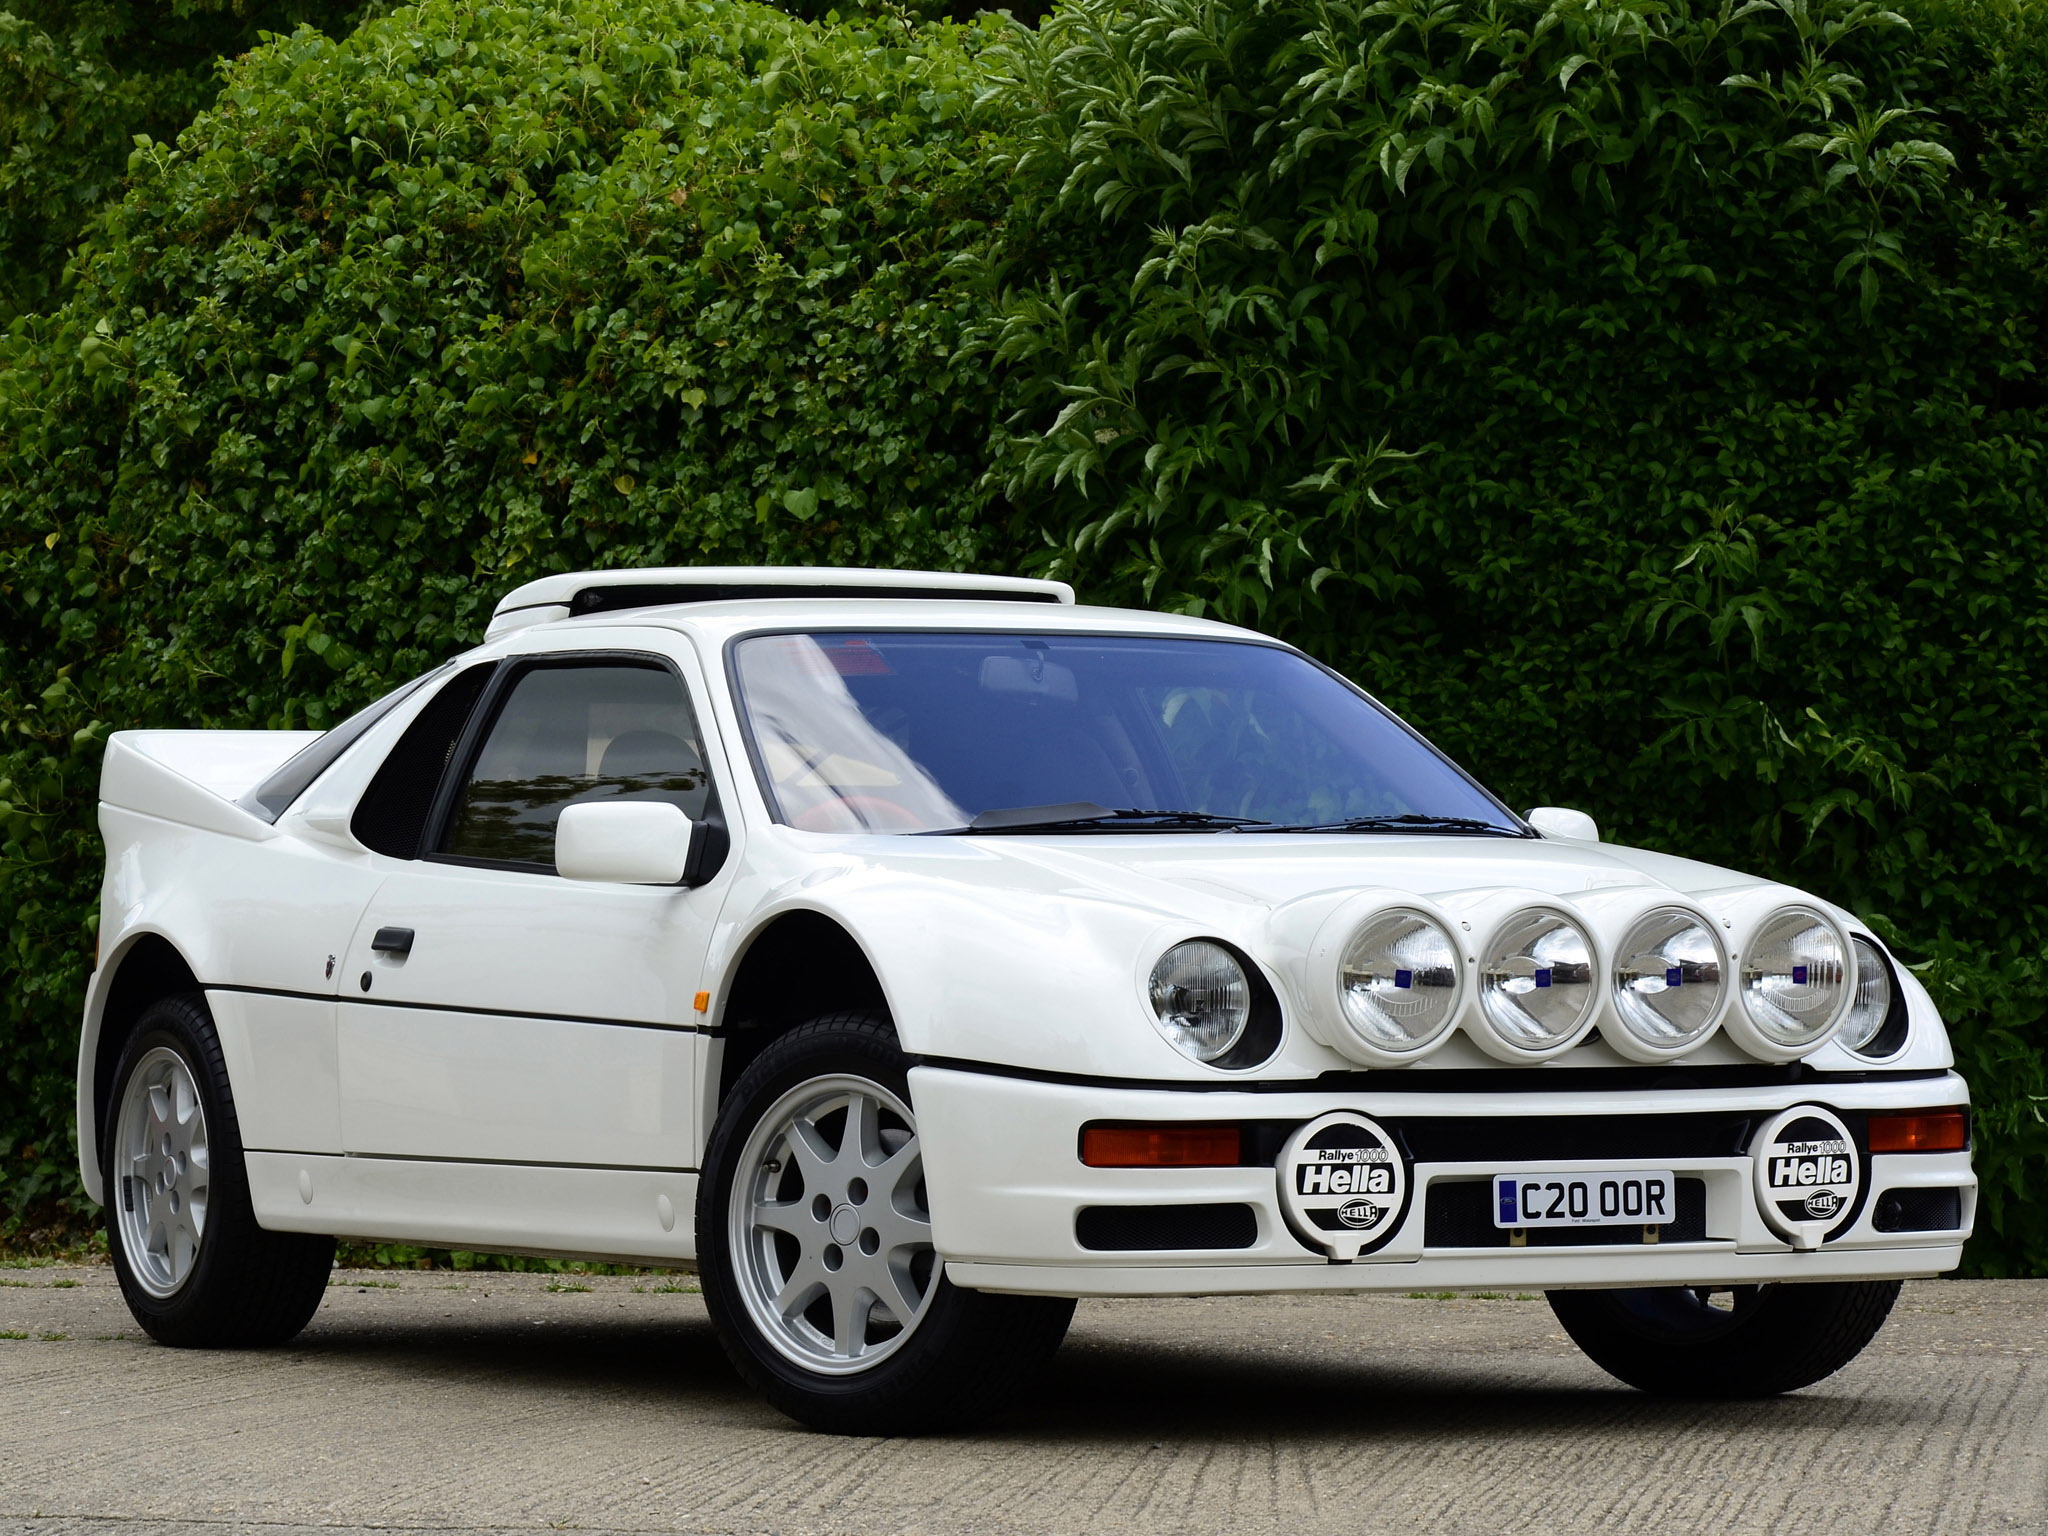 Ford Rs200 Supercar Supercars Classic Race Racing V